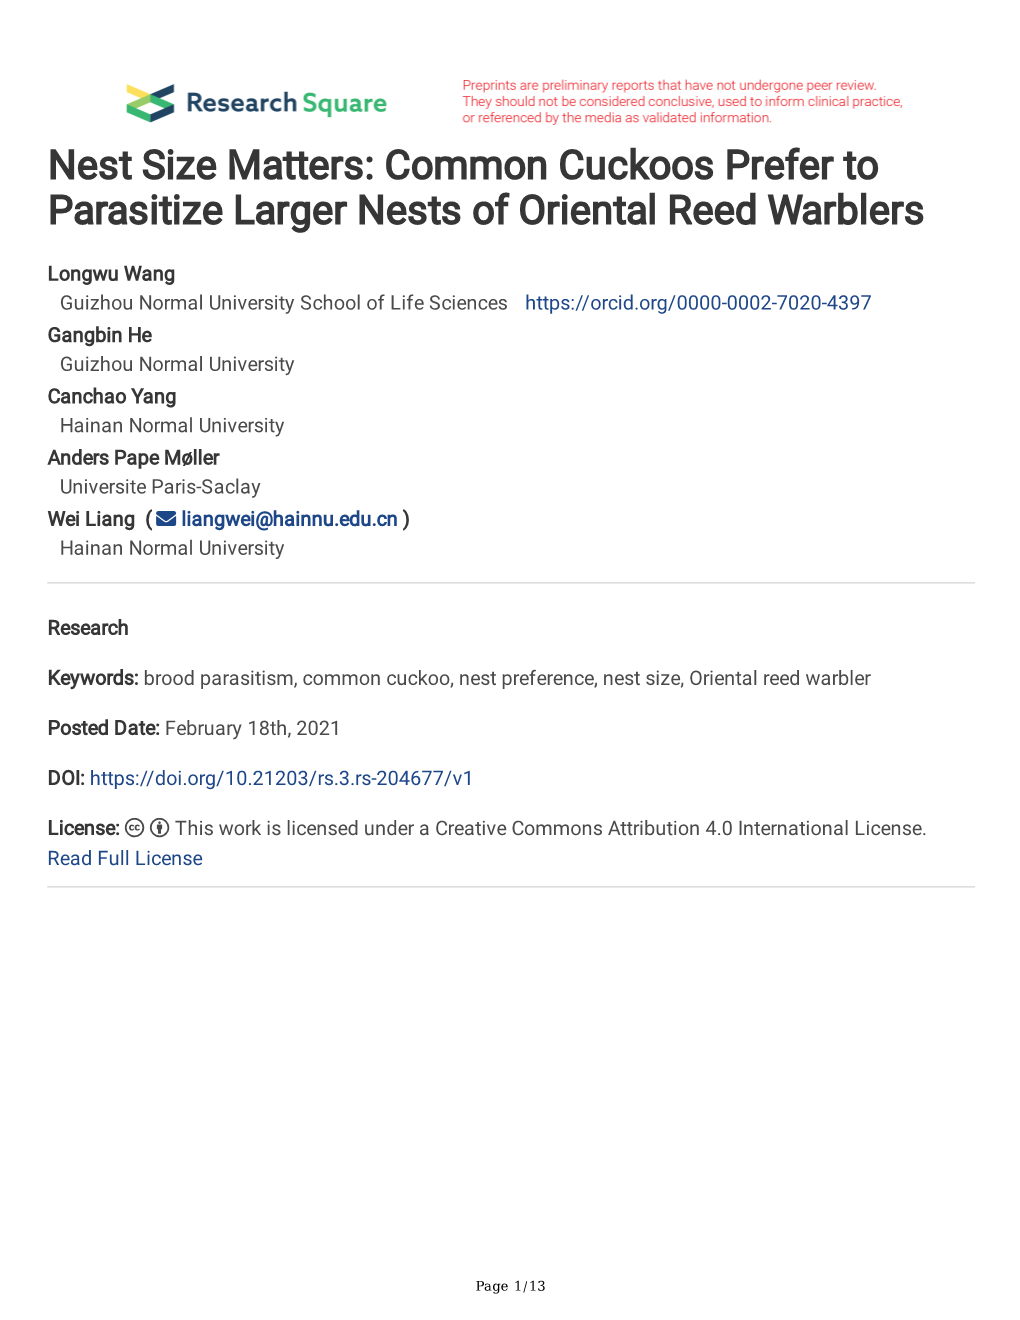 Nest Size Matters: Common Cuckoos Prefer to Parasitize Larger Nests of Oriental Reed Warblers